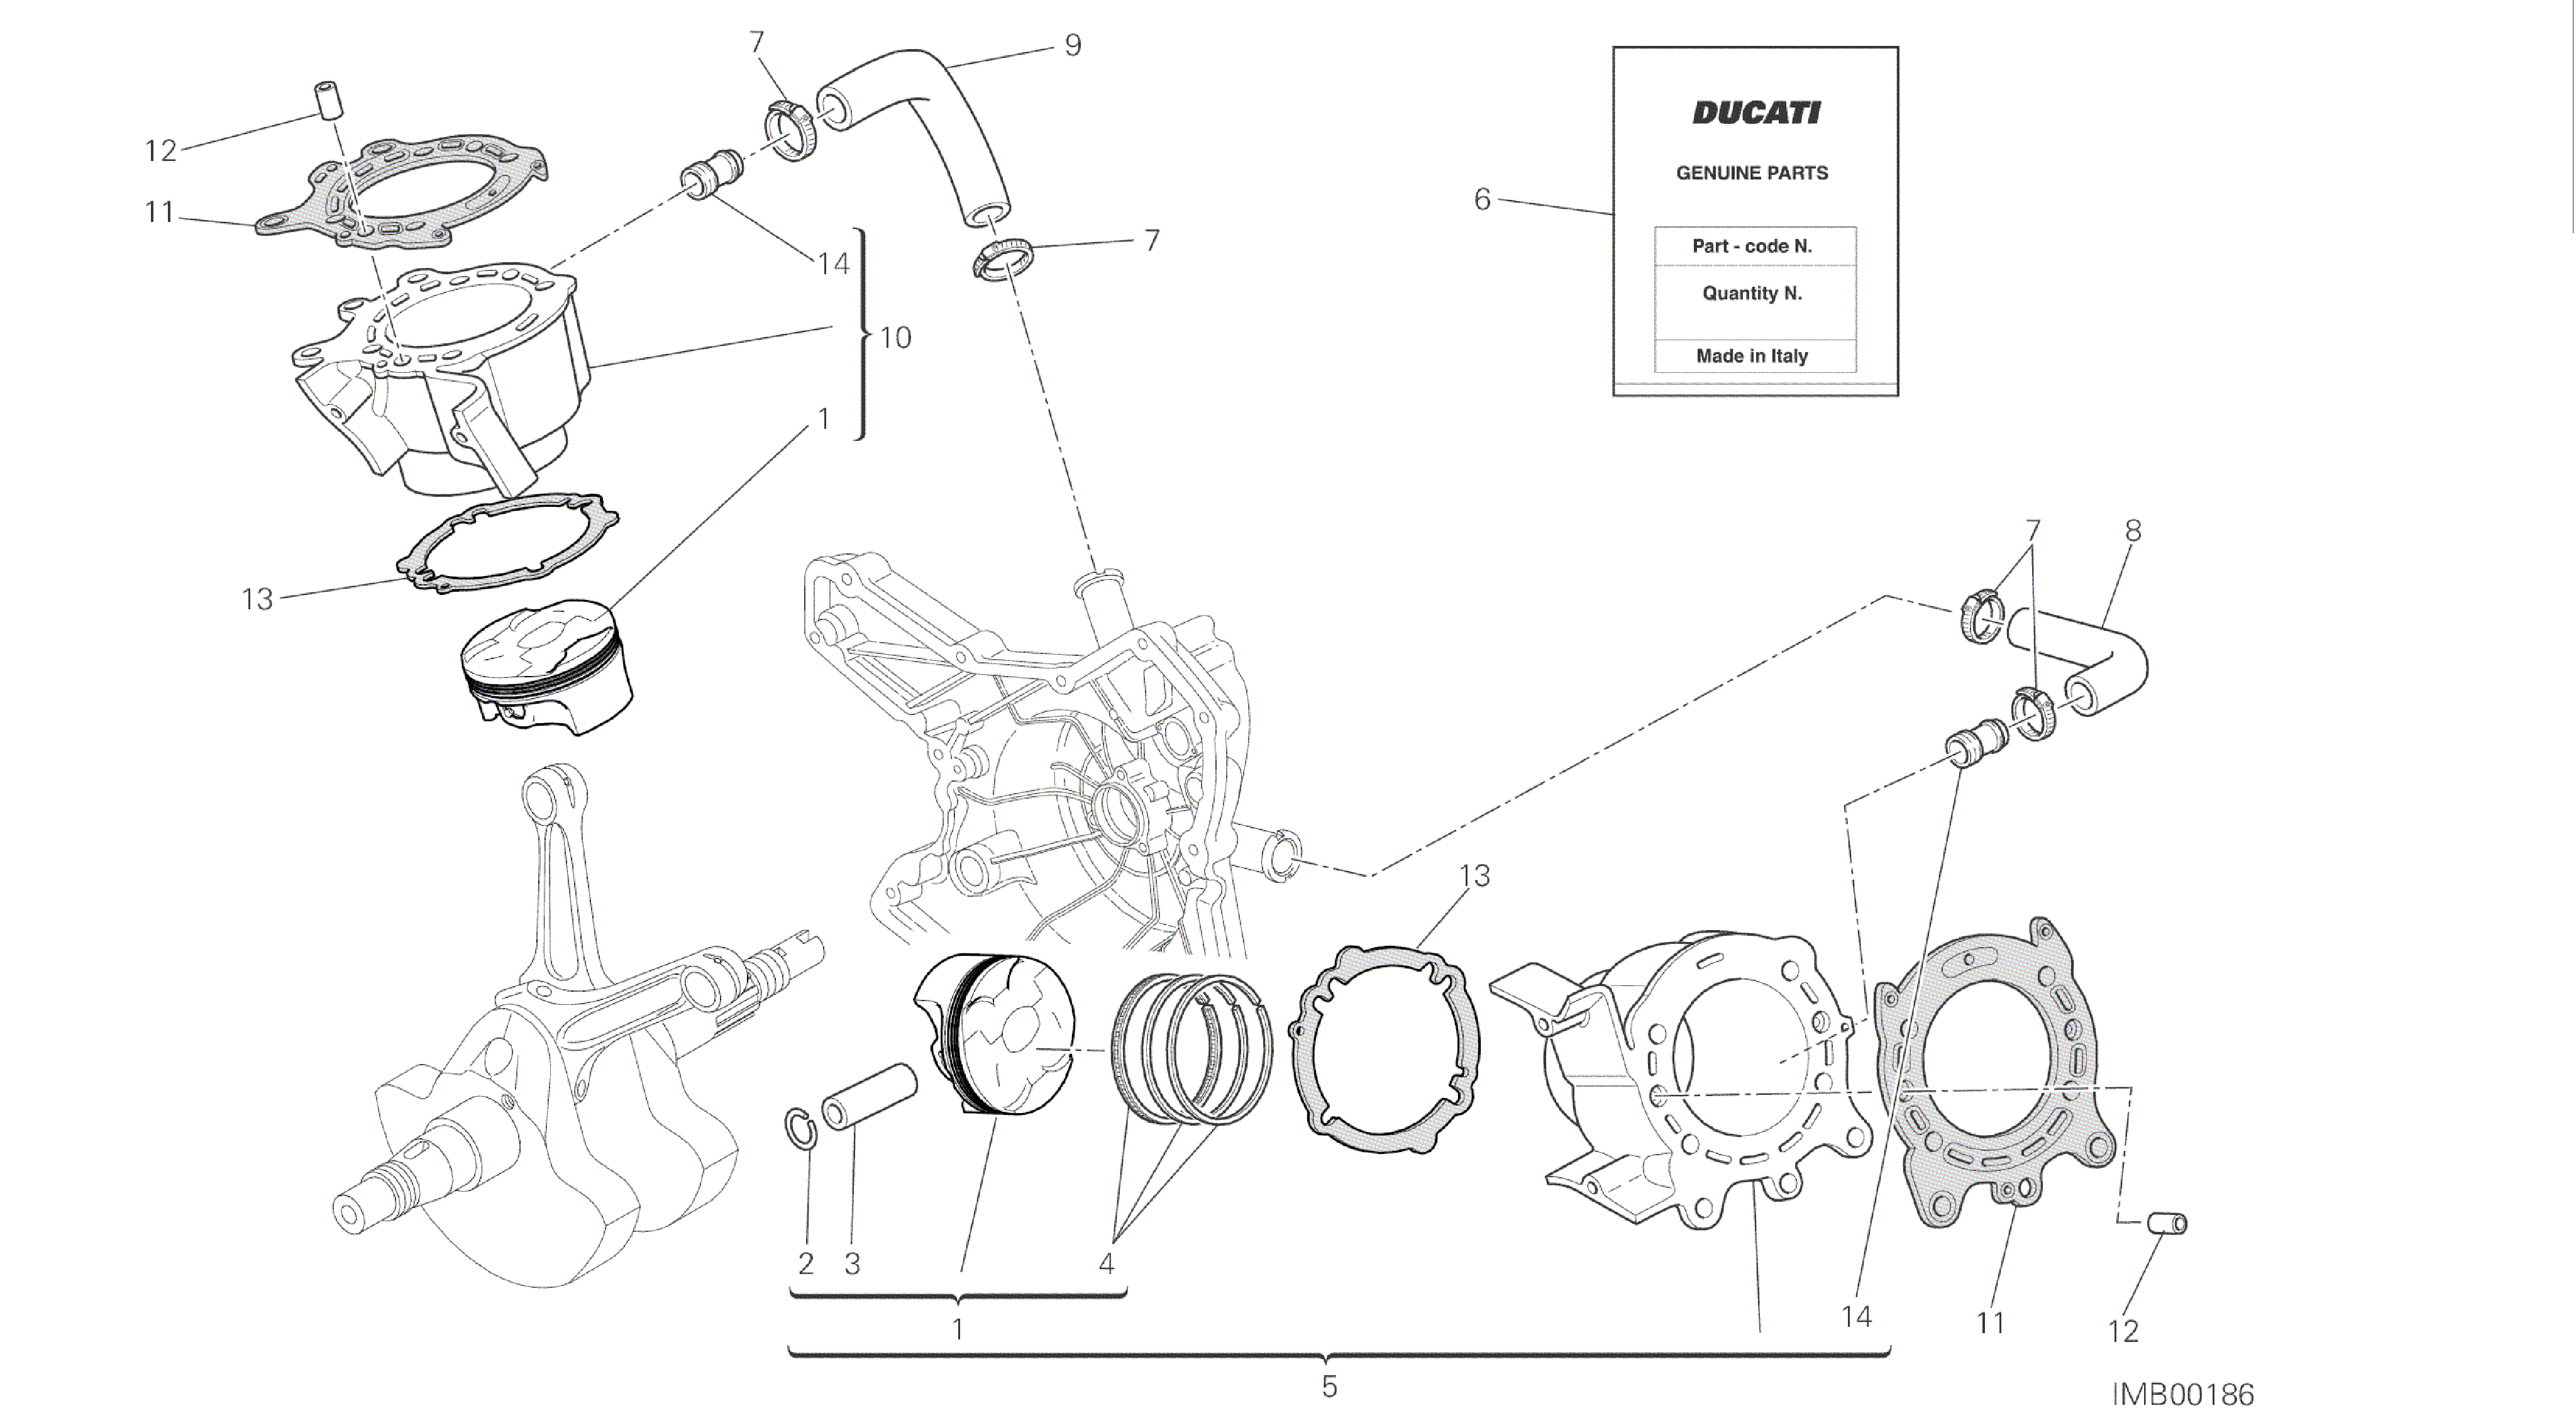 DRAWING 007 - CYLINDERS - PISTONS [MOD:HYM-SP;XST:AUS,EUR,FRA,JAP,TWN]GROUP ENGINE